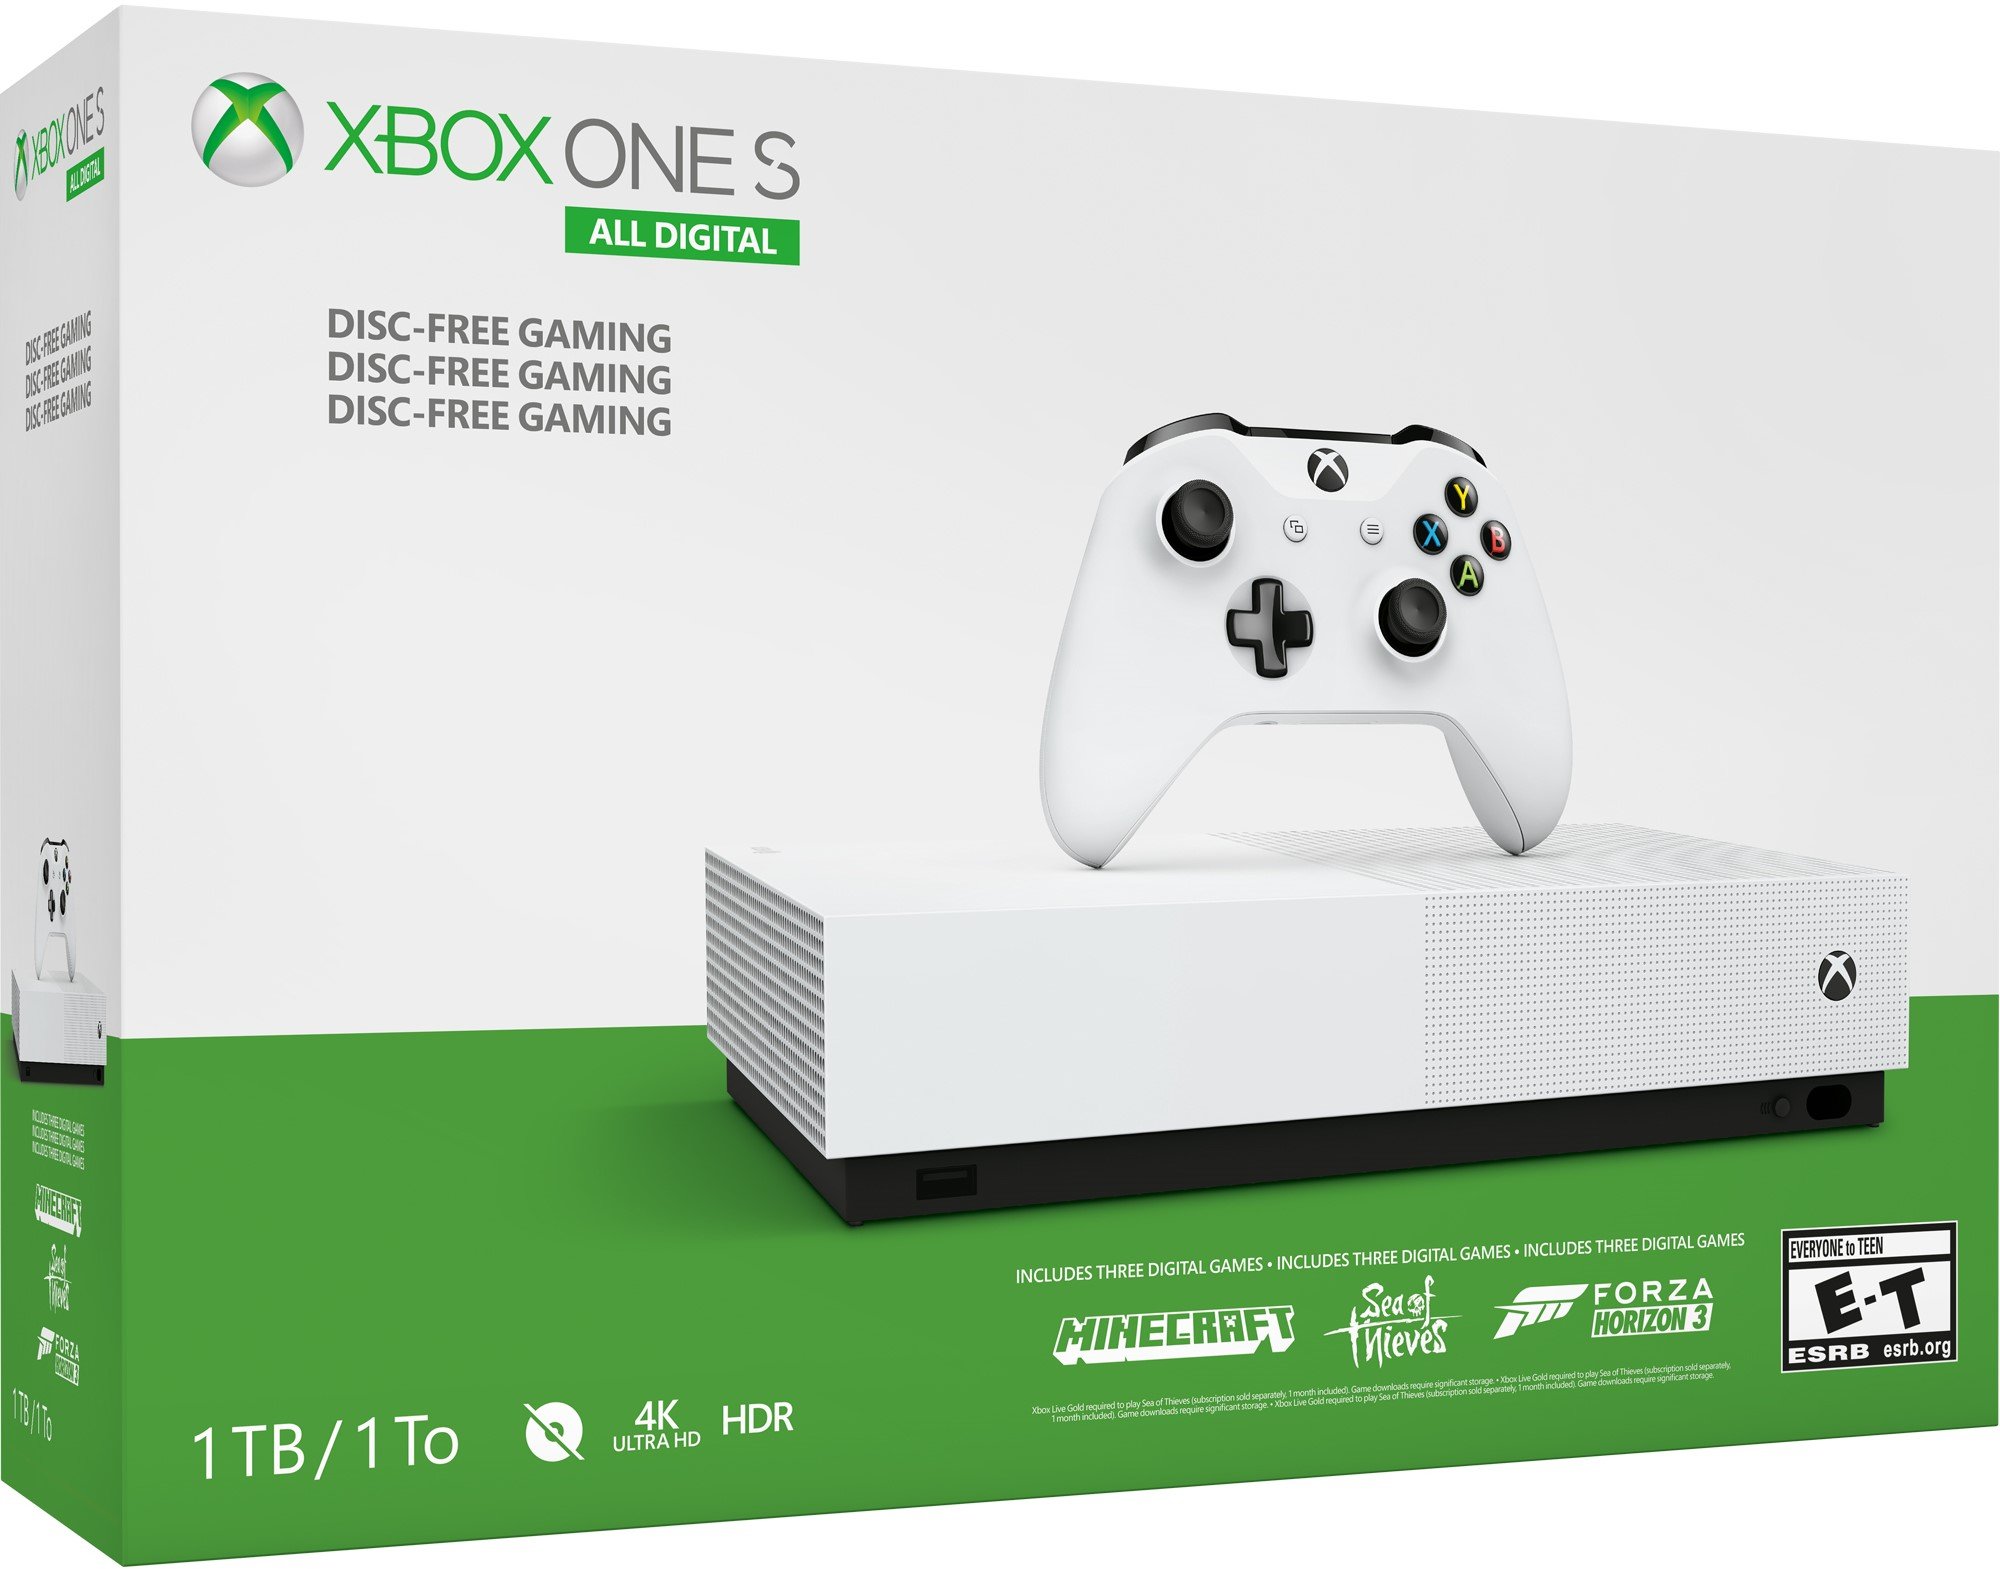 These Are The Best Deals On Xbox Consoles You Ll Find This Month Windows Global - xbox one s roblox bundle best buy